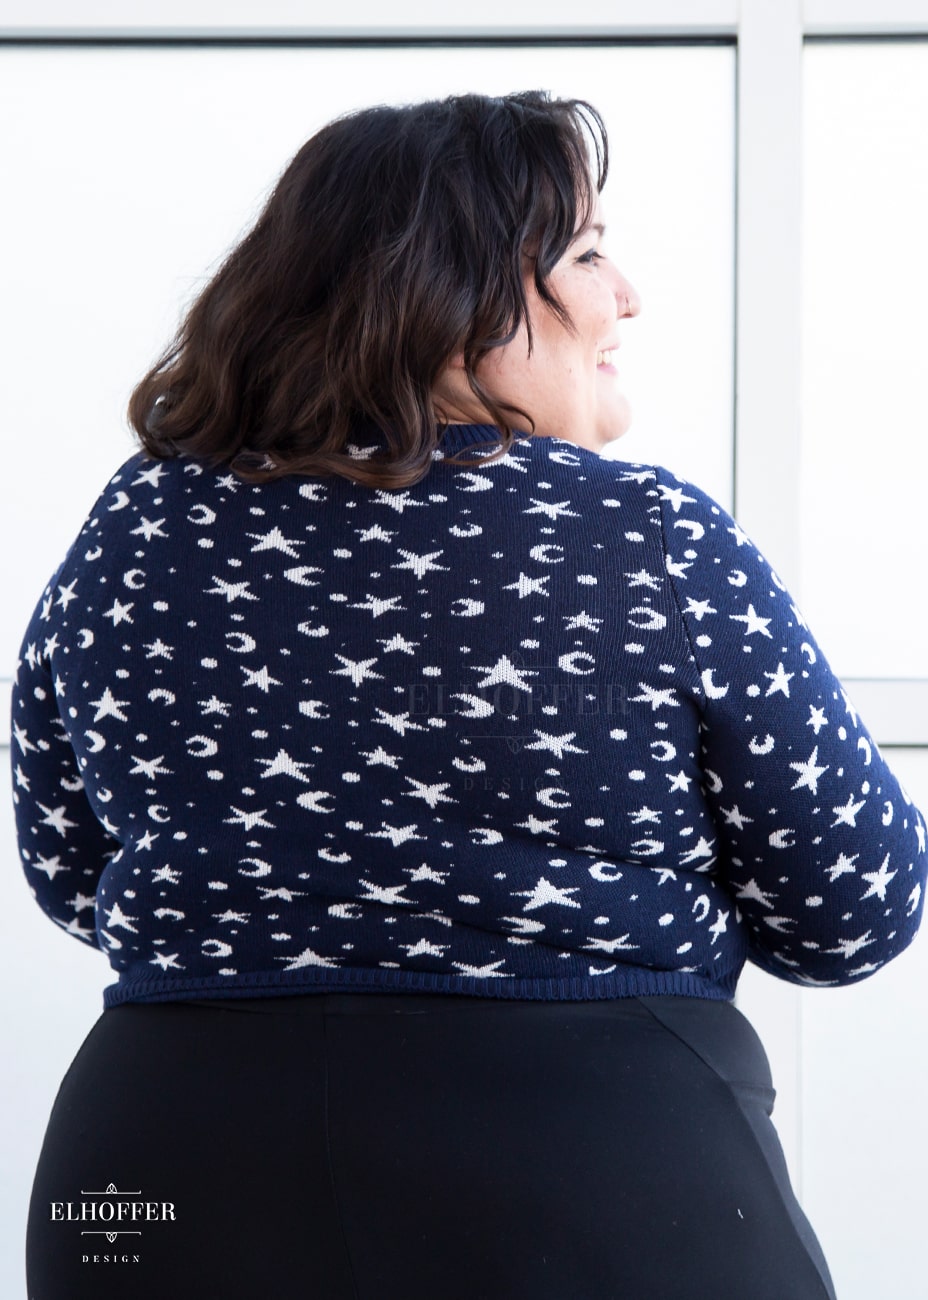 Essential Cordelia Cropped Cardi - Navy Starry Witch